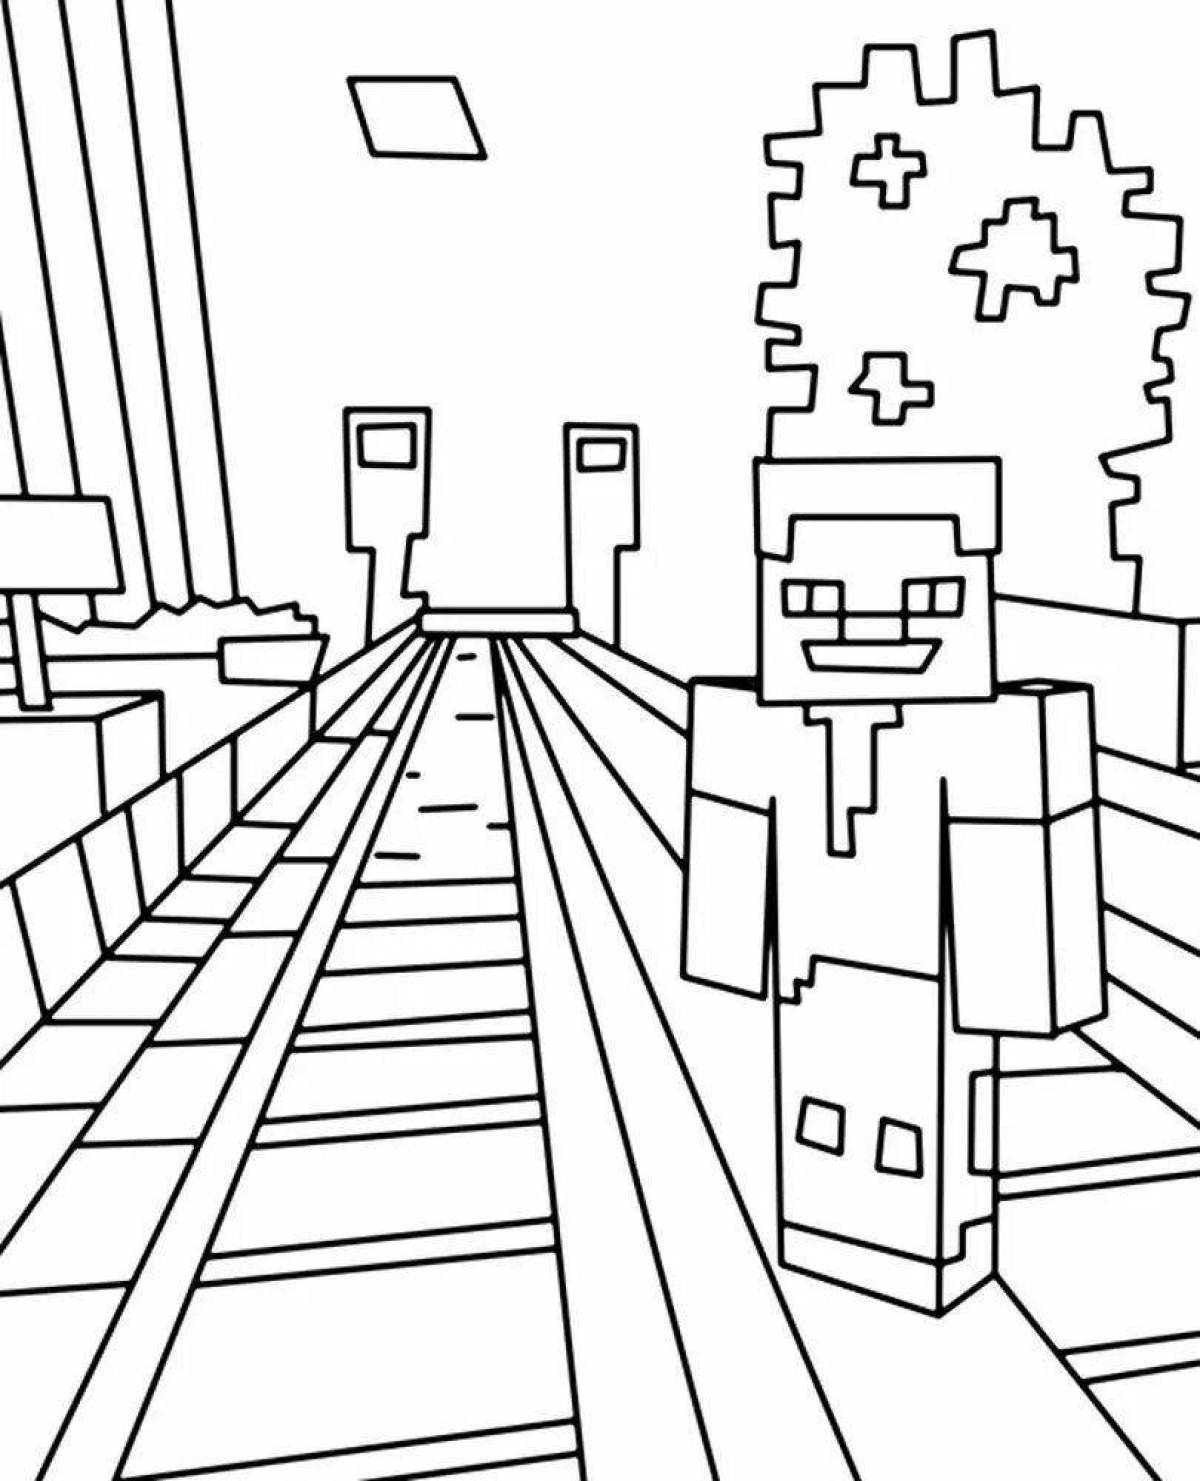 Colorful minecraft city coloring page